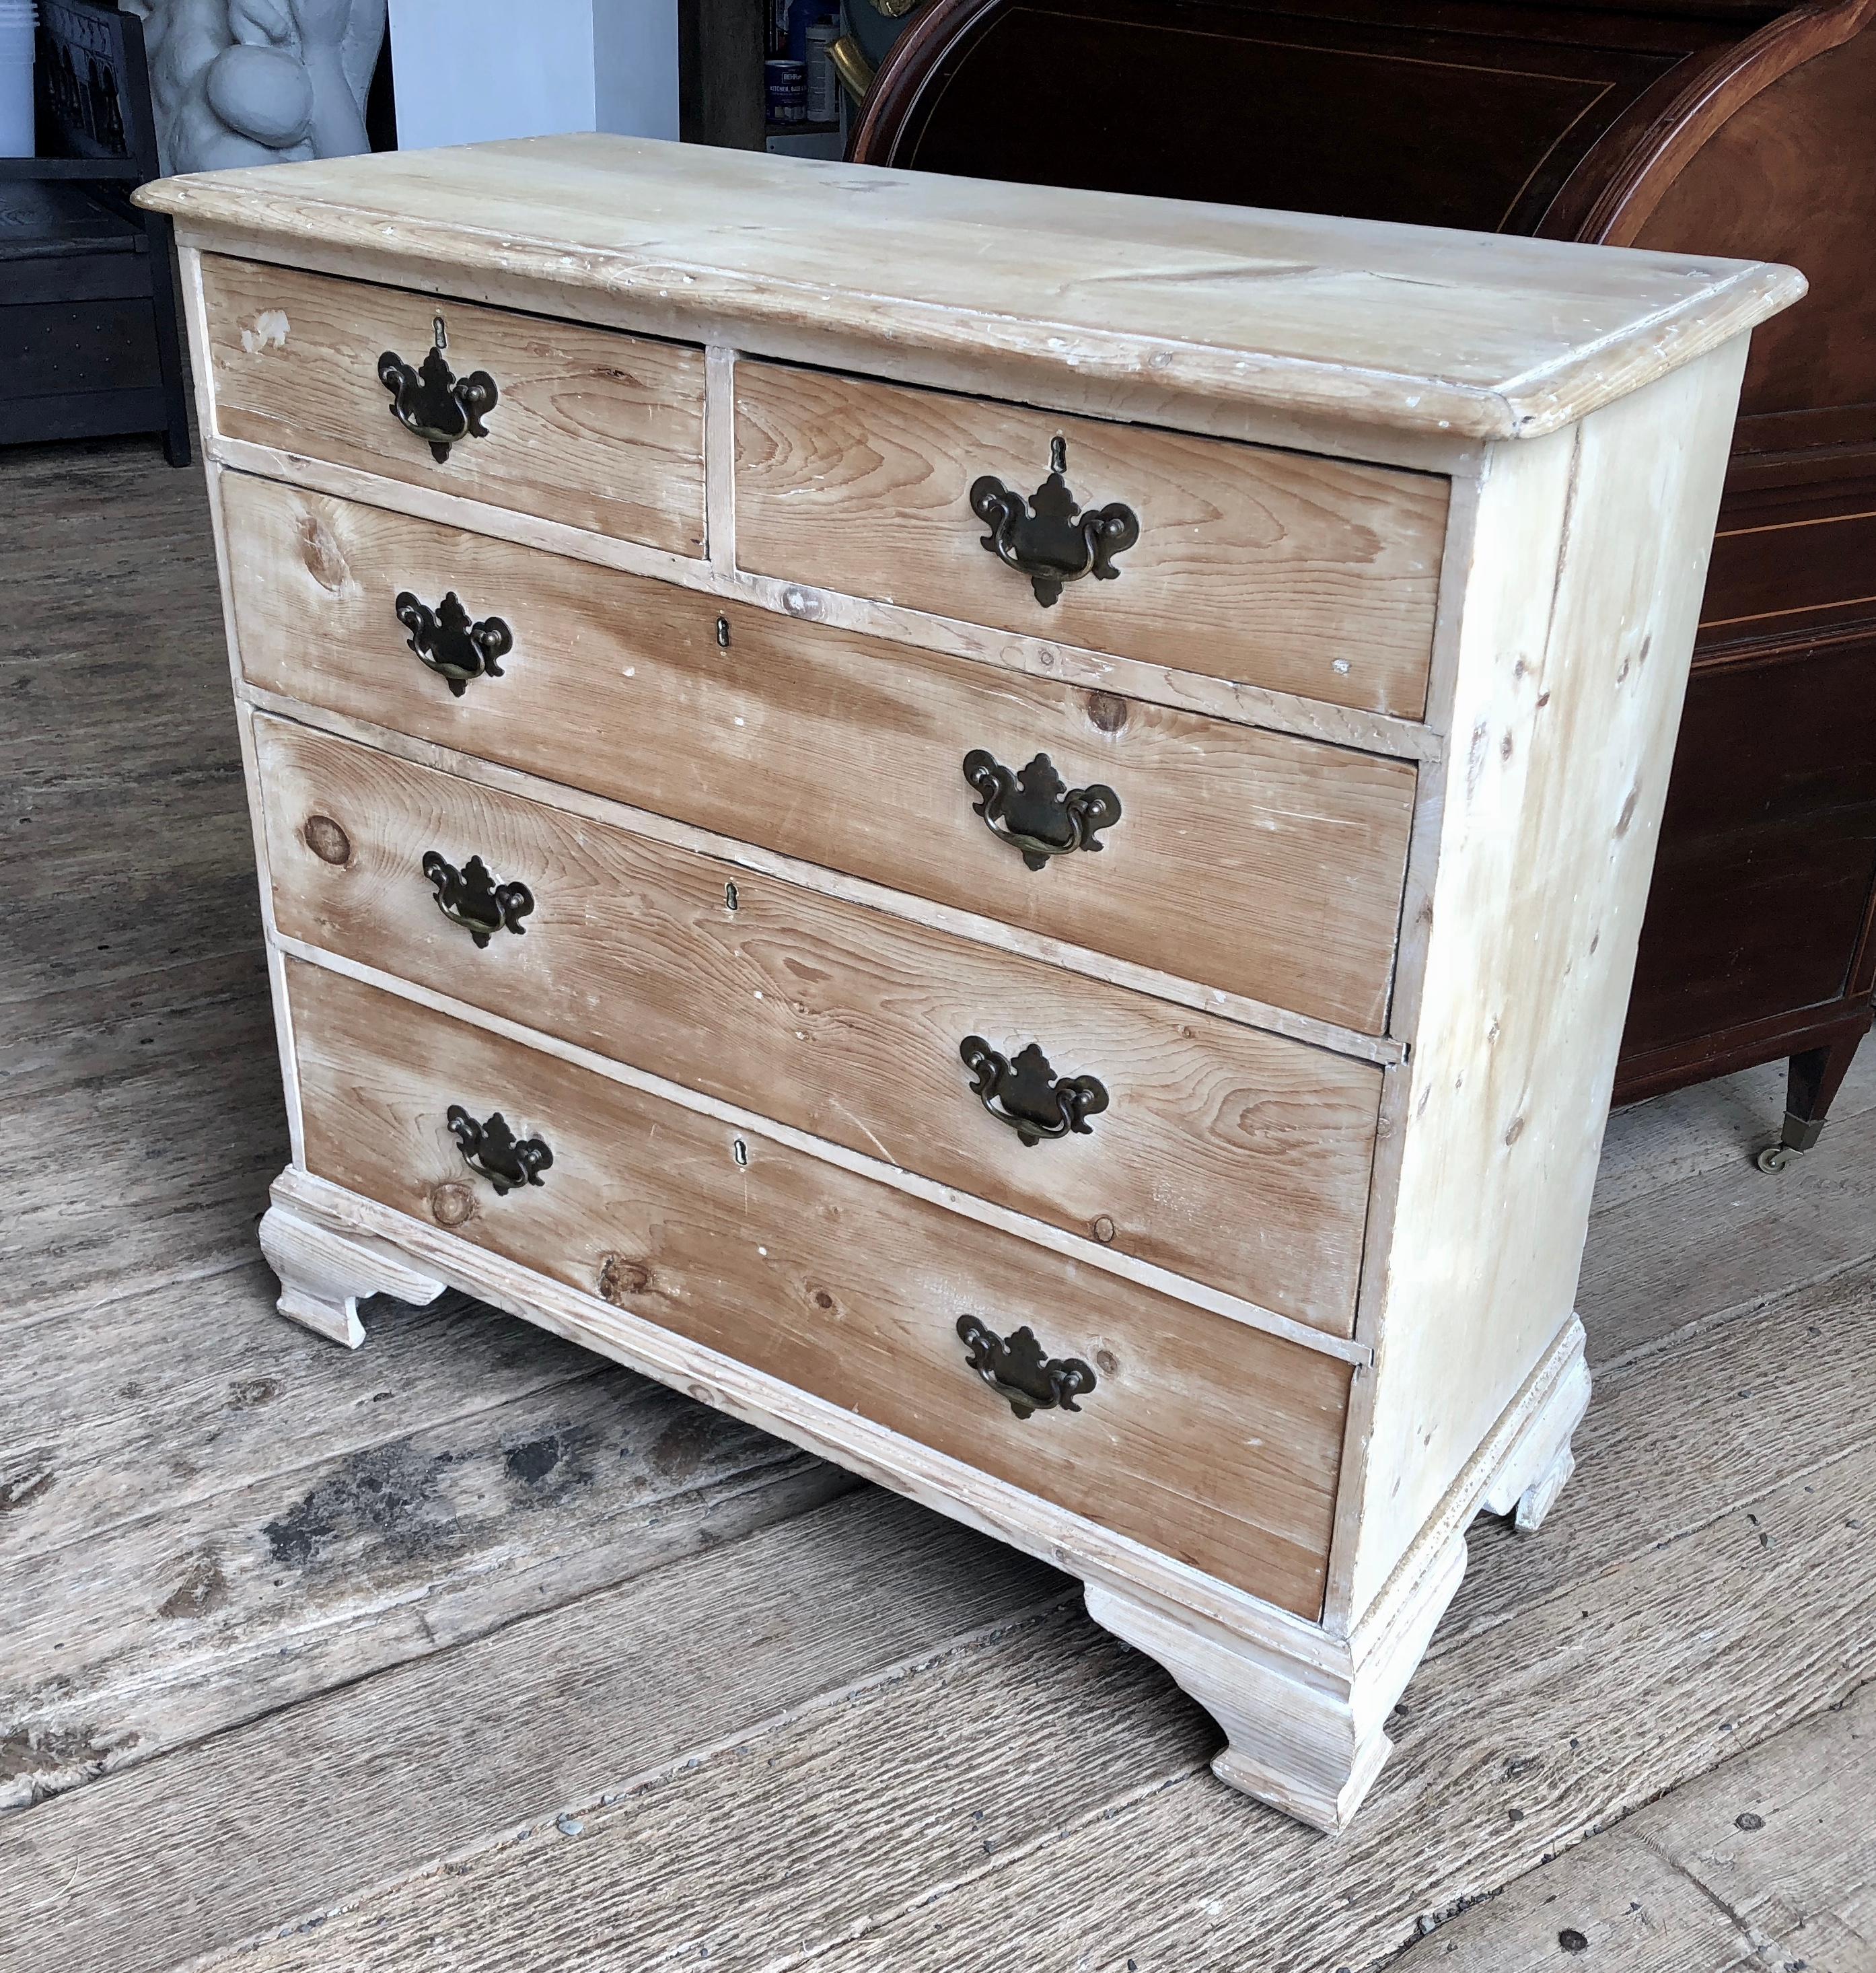 A late 18th century English chest of drawers in stripped and bleached pine, with two short drawers over three full drawers with ogee bracket feet and bat-wing brass pulls.